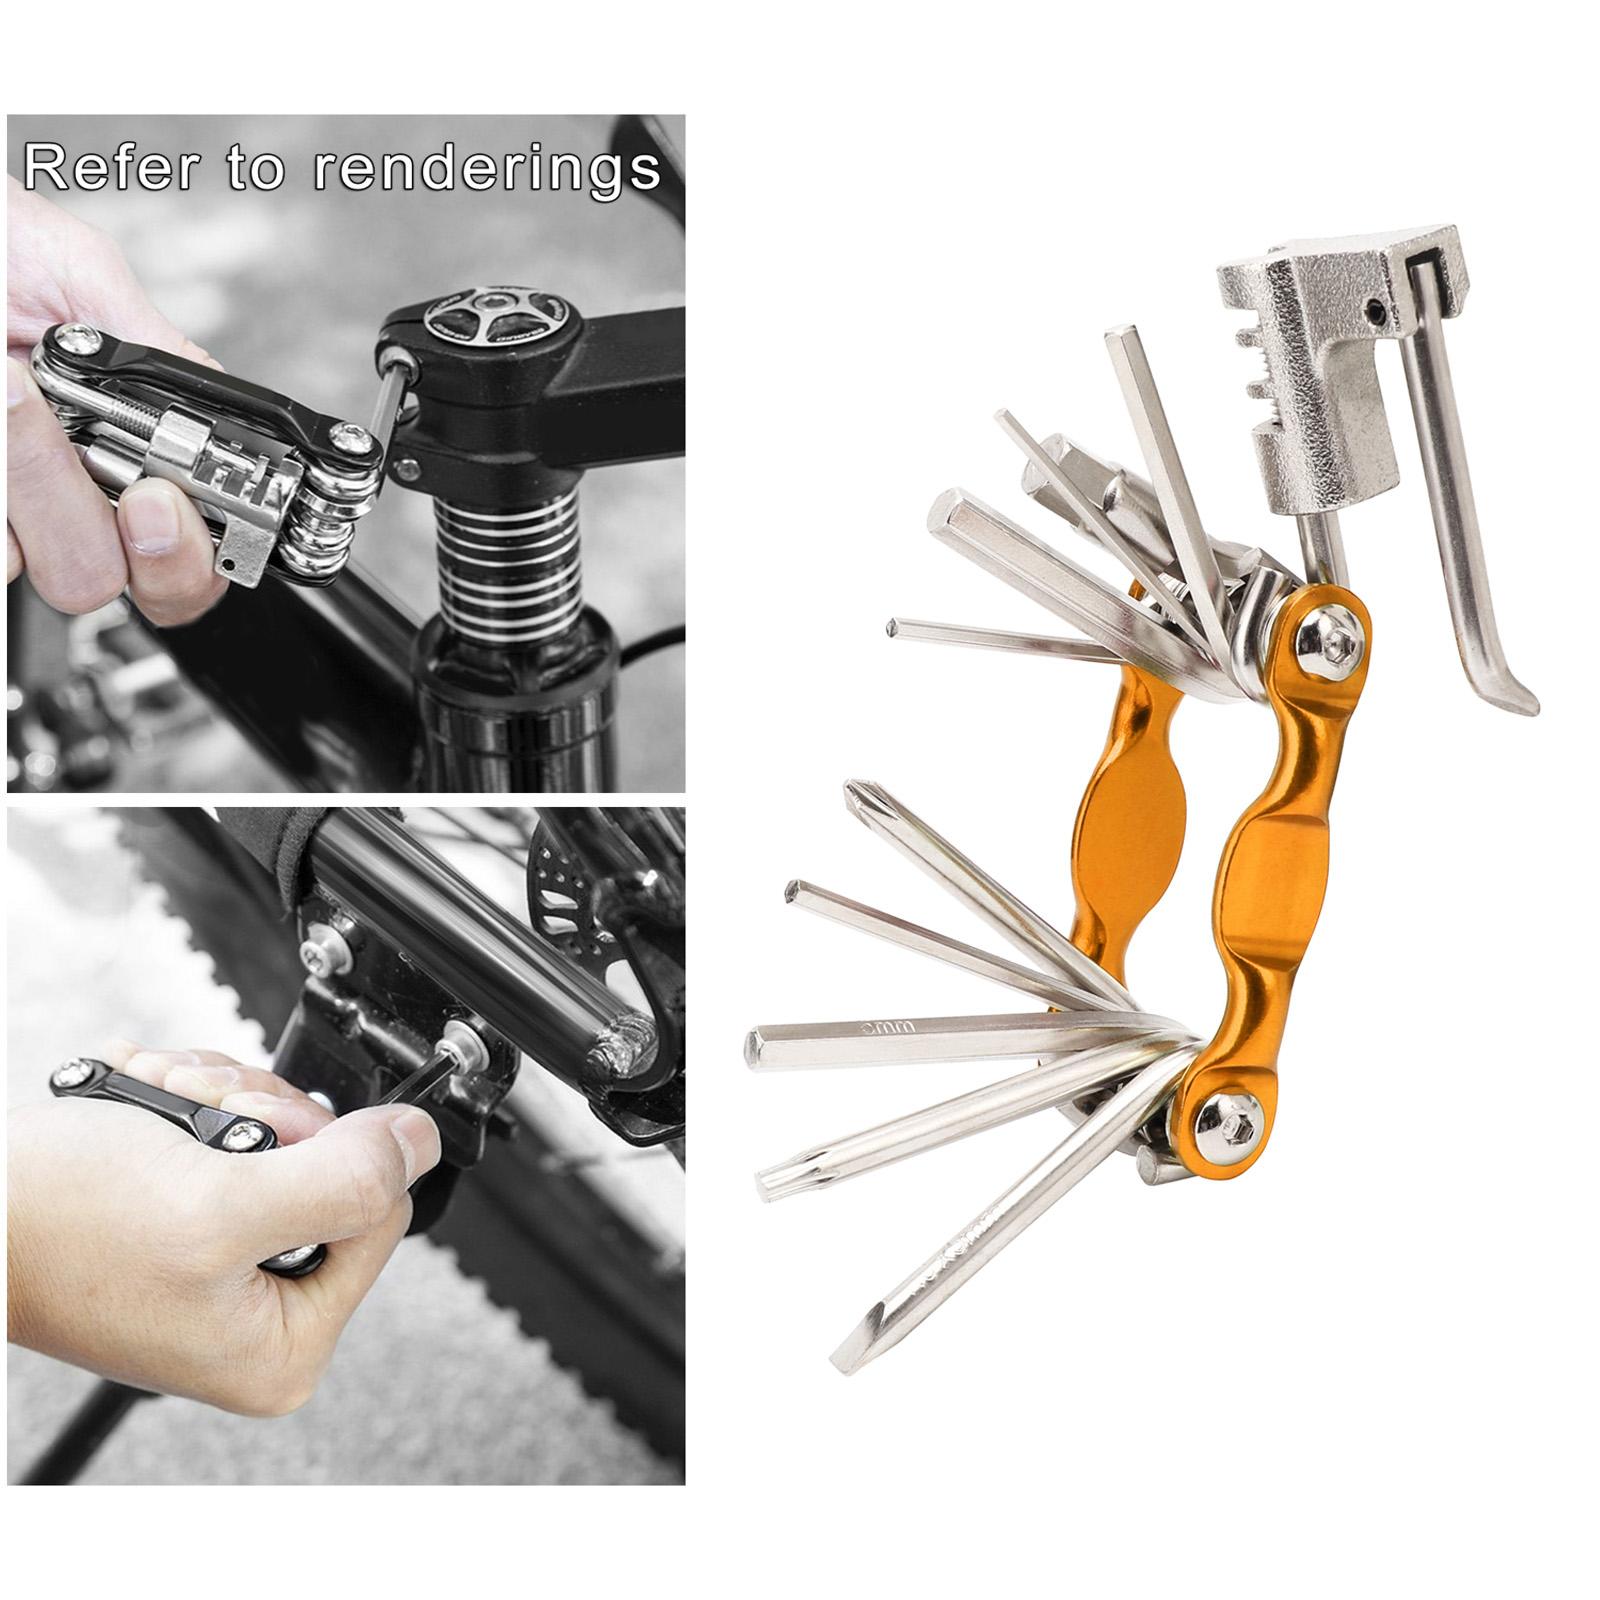 Portable Multifunction Bicycle Repair Tool Set 11 in 1 for Motorcycle golden